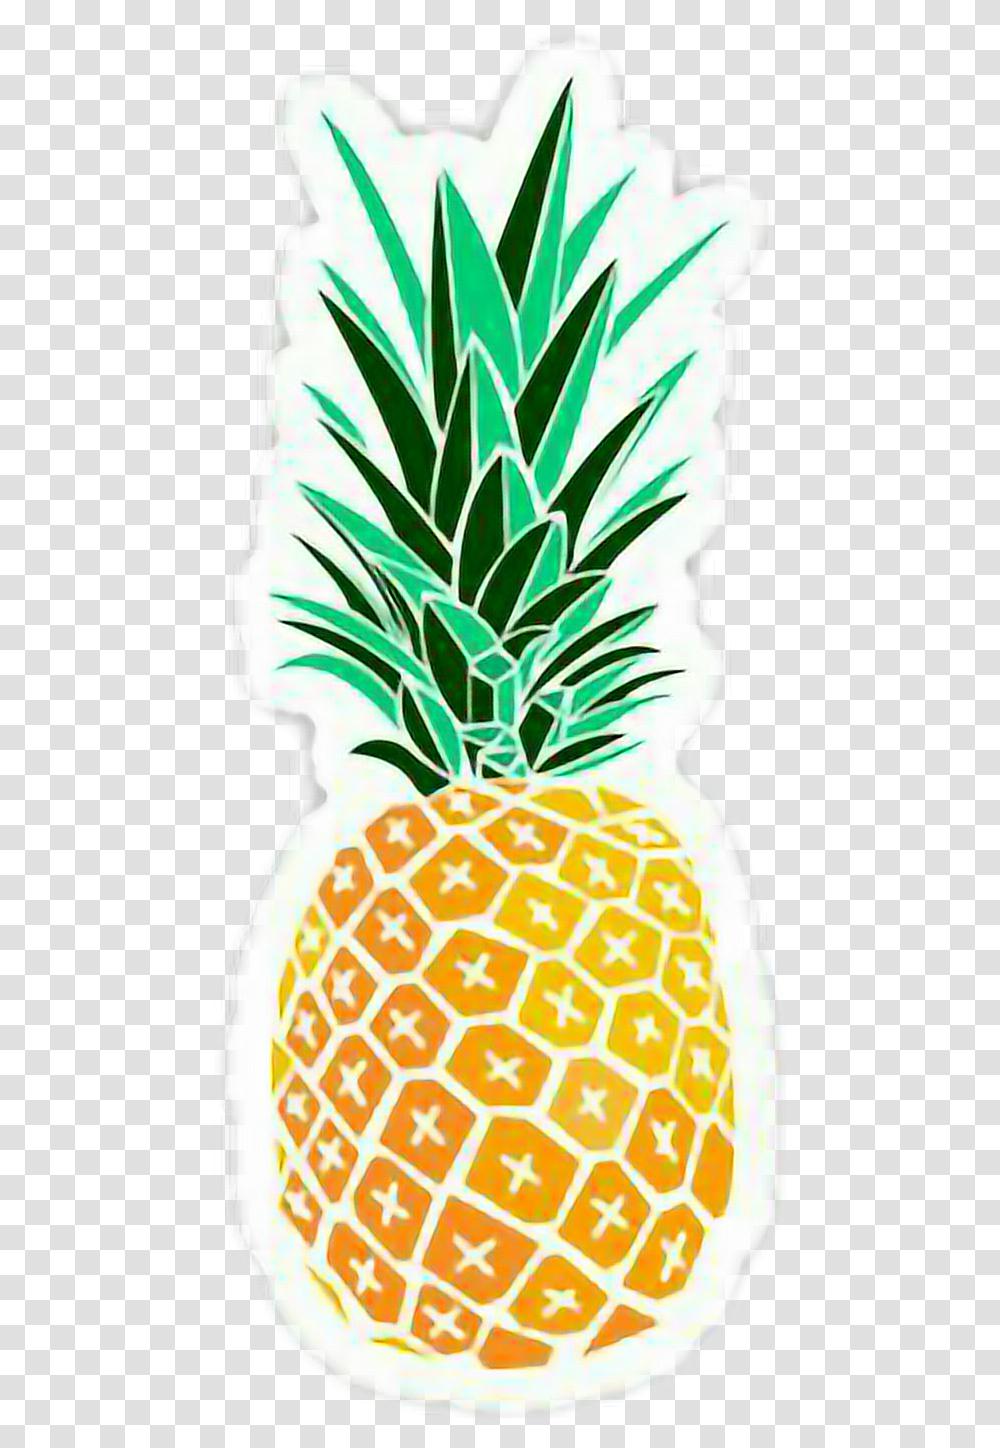 Stickers Tumblr Cute Fruit Yellow Gregreen Ananas Black And White Pineapple, Plant, Food Transparent Png